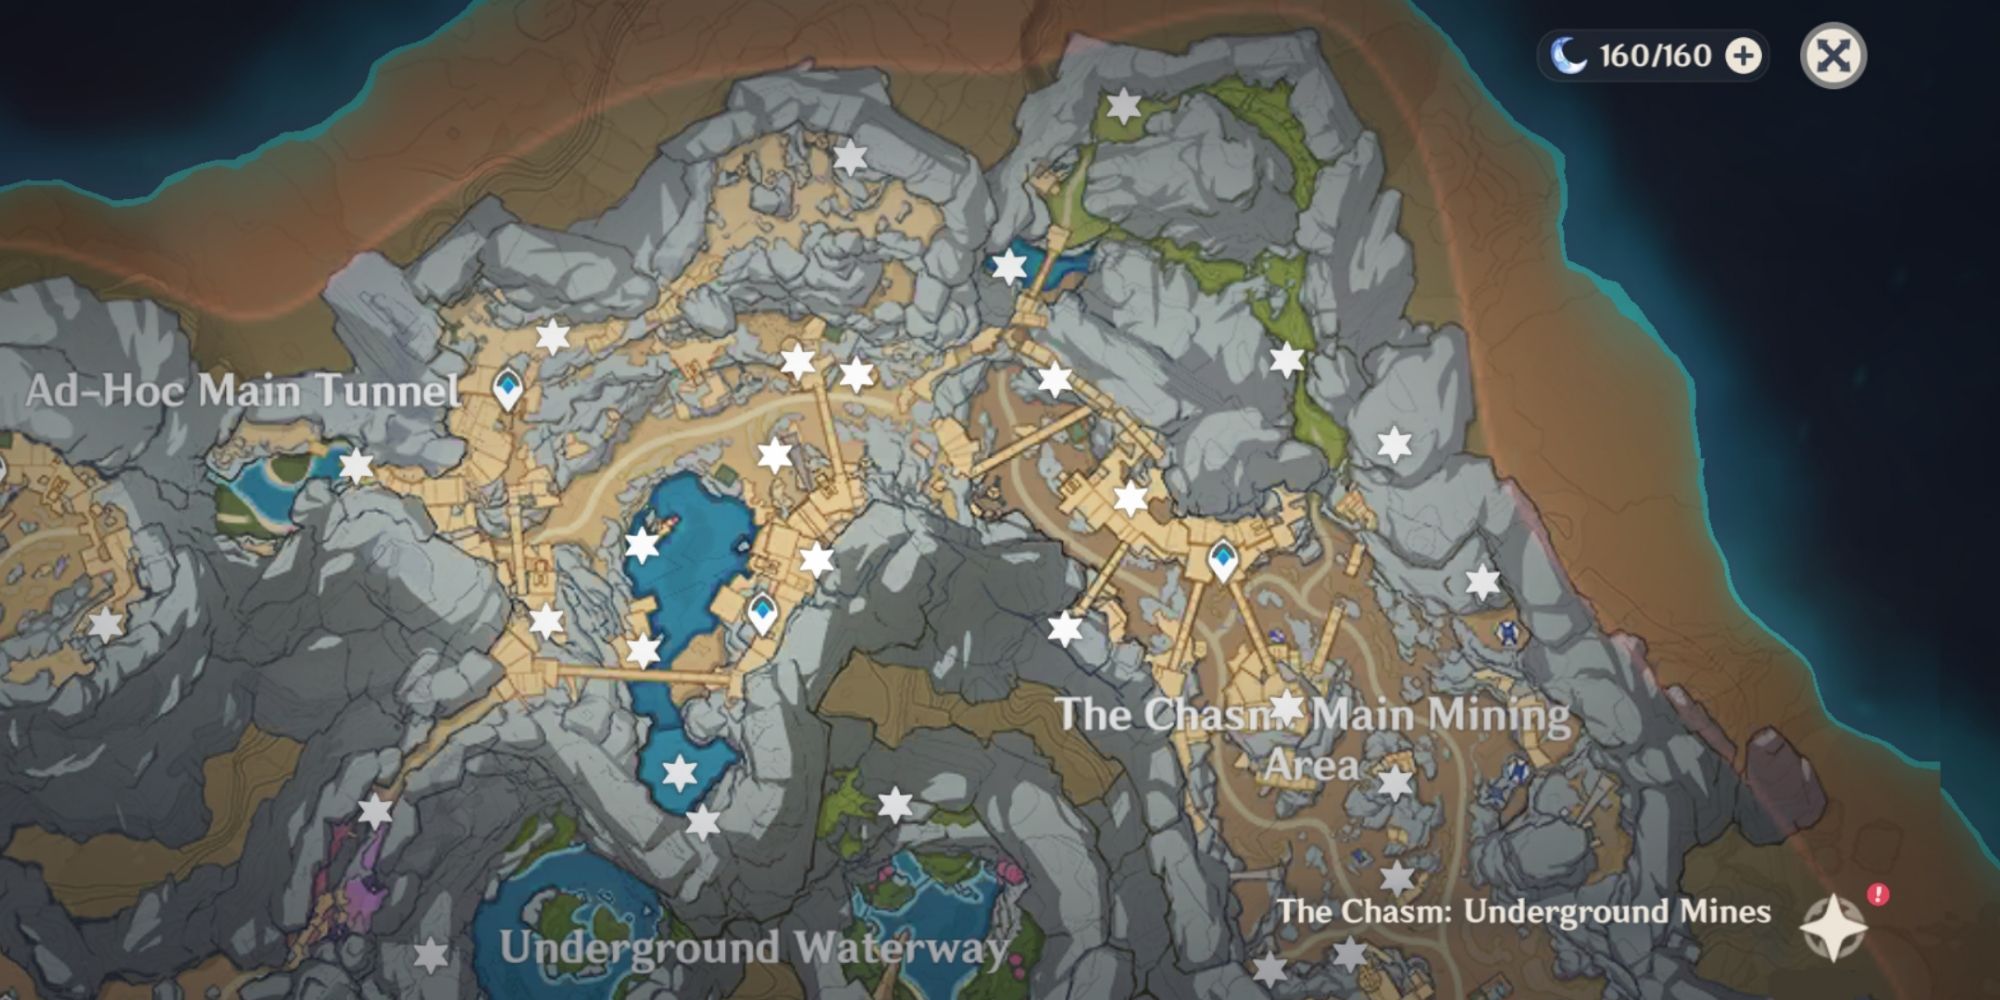 the chasm main mining area in Genshin impact